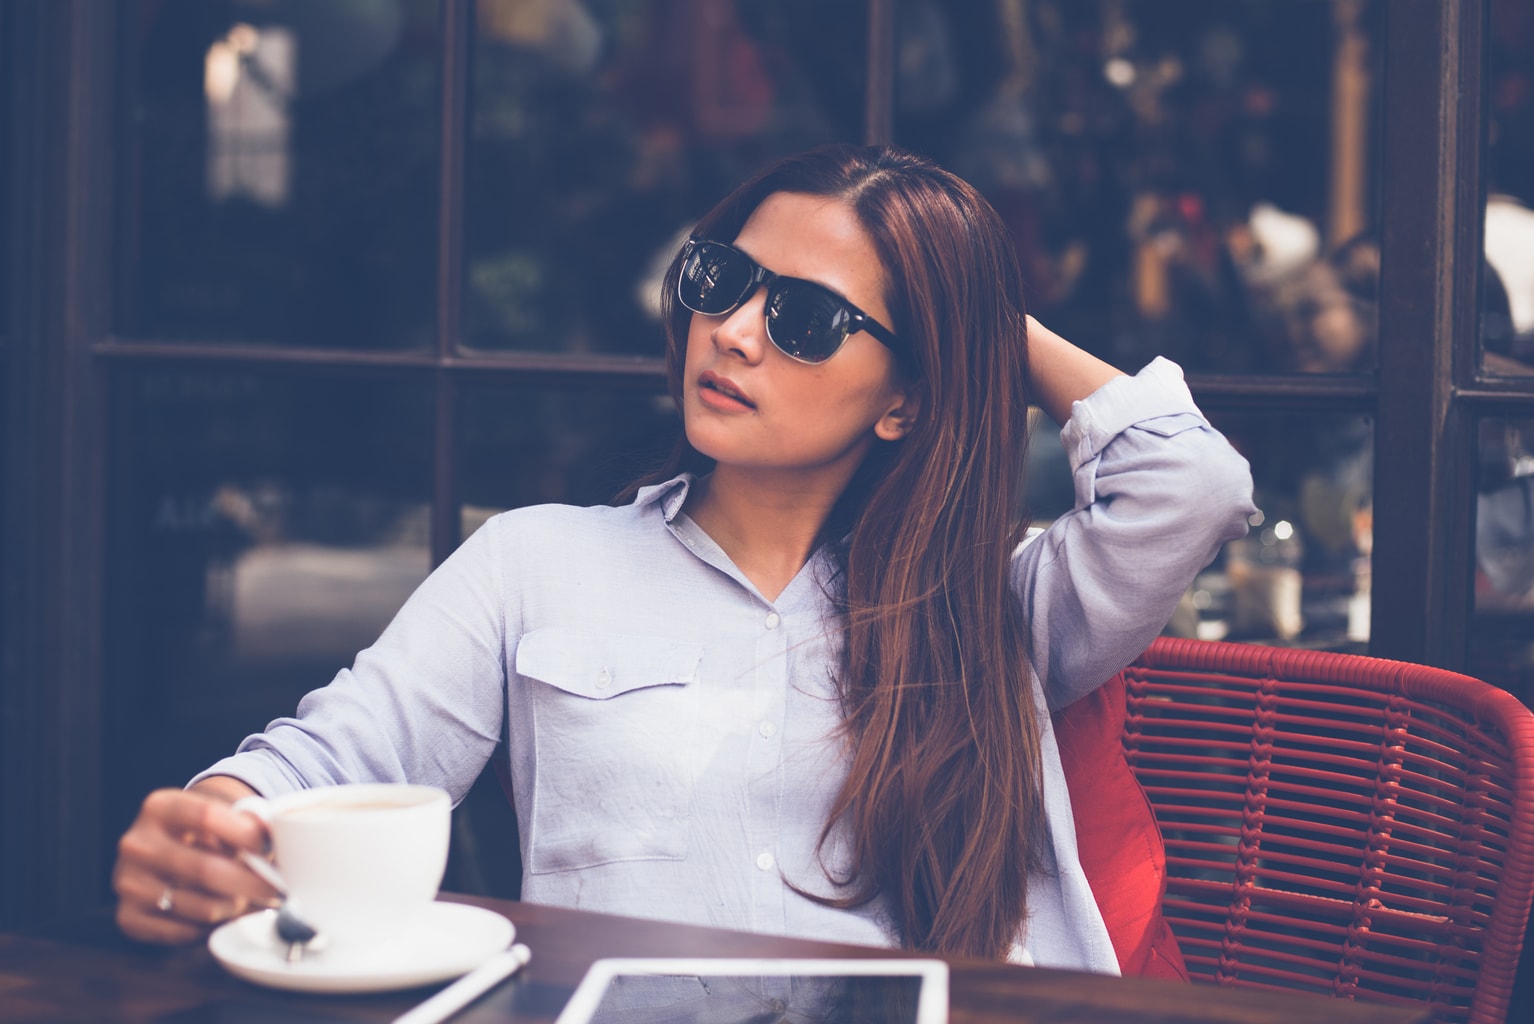 How to look older - tips on how to dress when you look younger than you are | Photo of a young woman wearing sunglasses and a button-up shirt, sitting at a table in a cafe holding a coffee cup